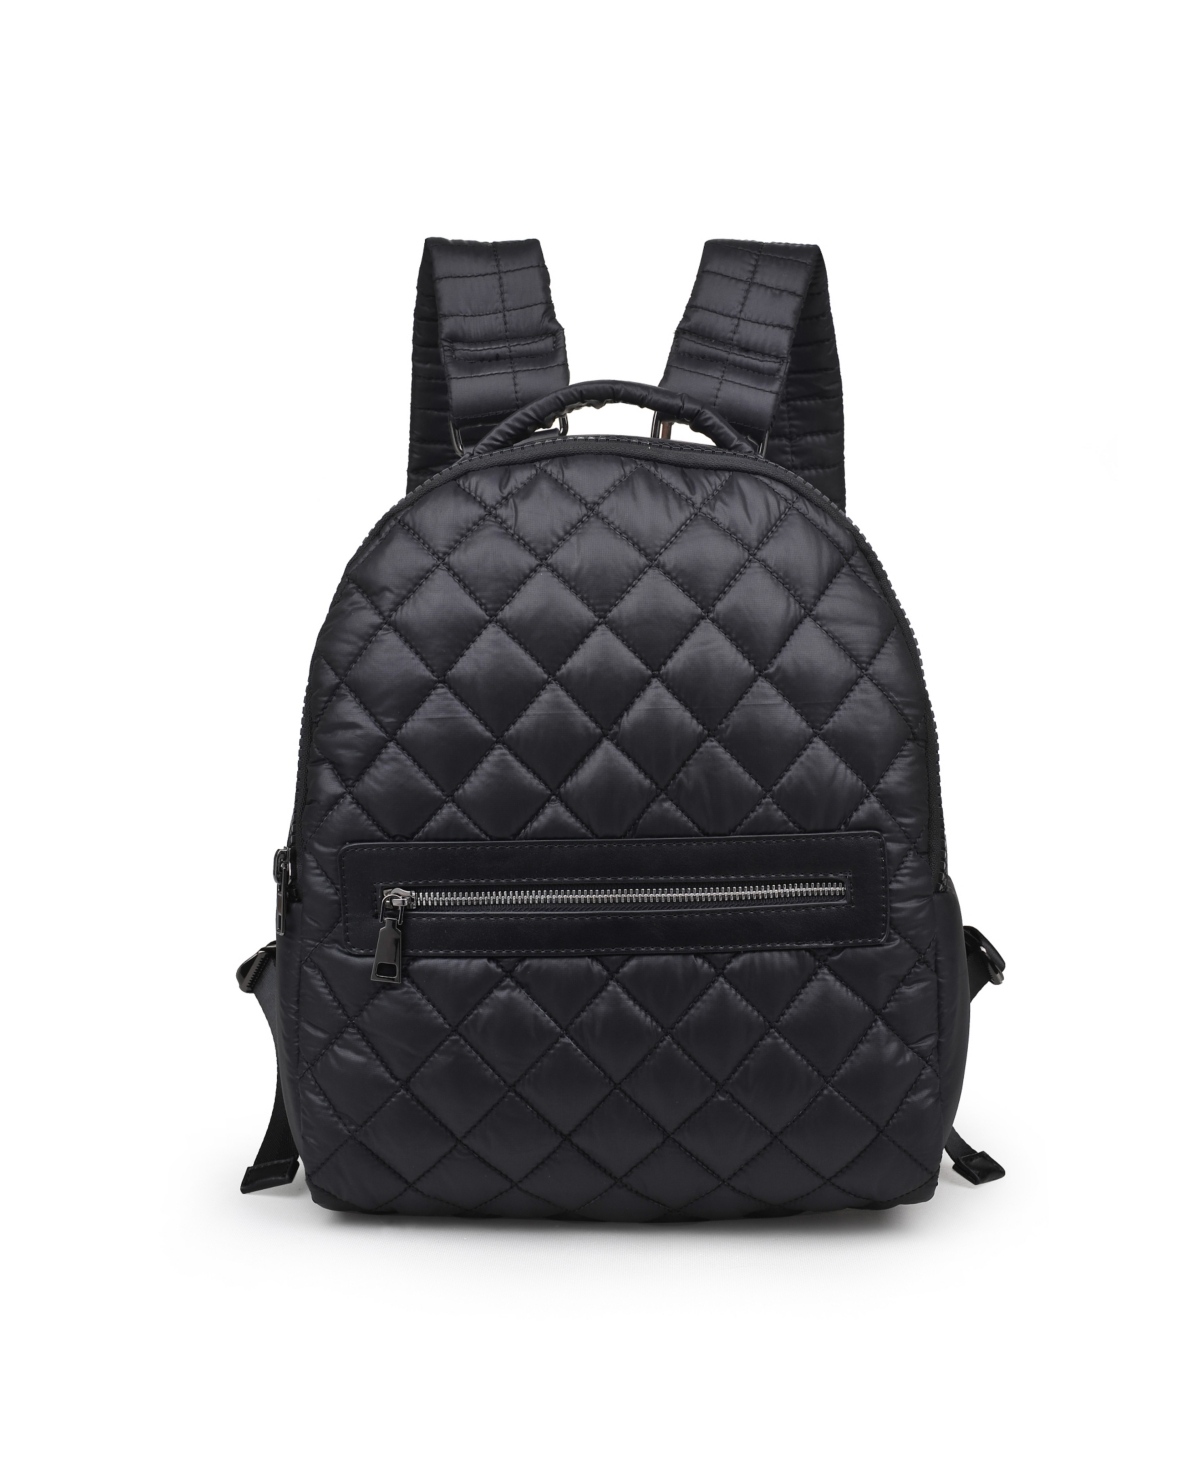 Women's All Star Quilted Backpack - Black